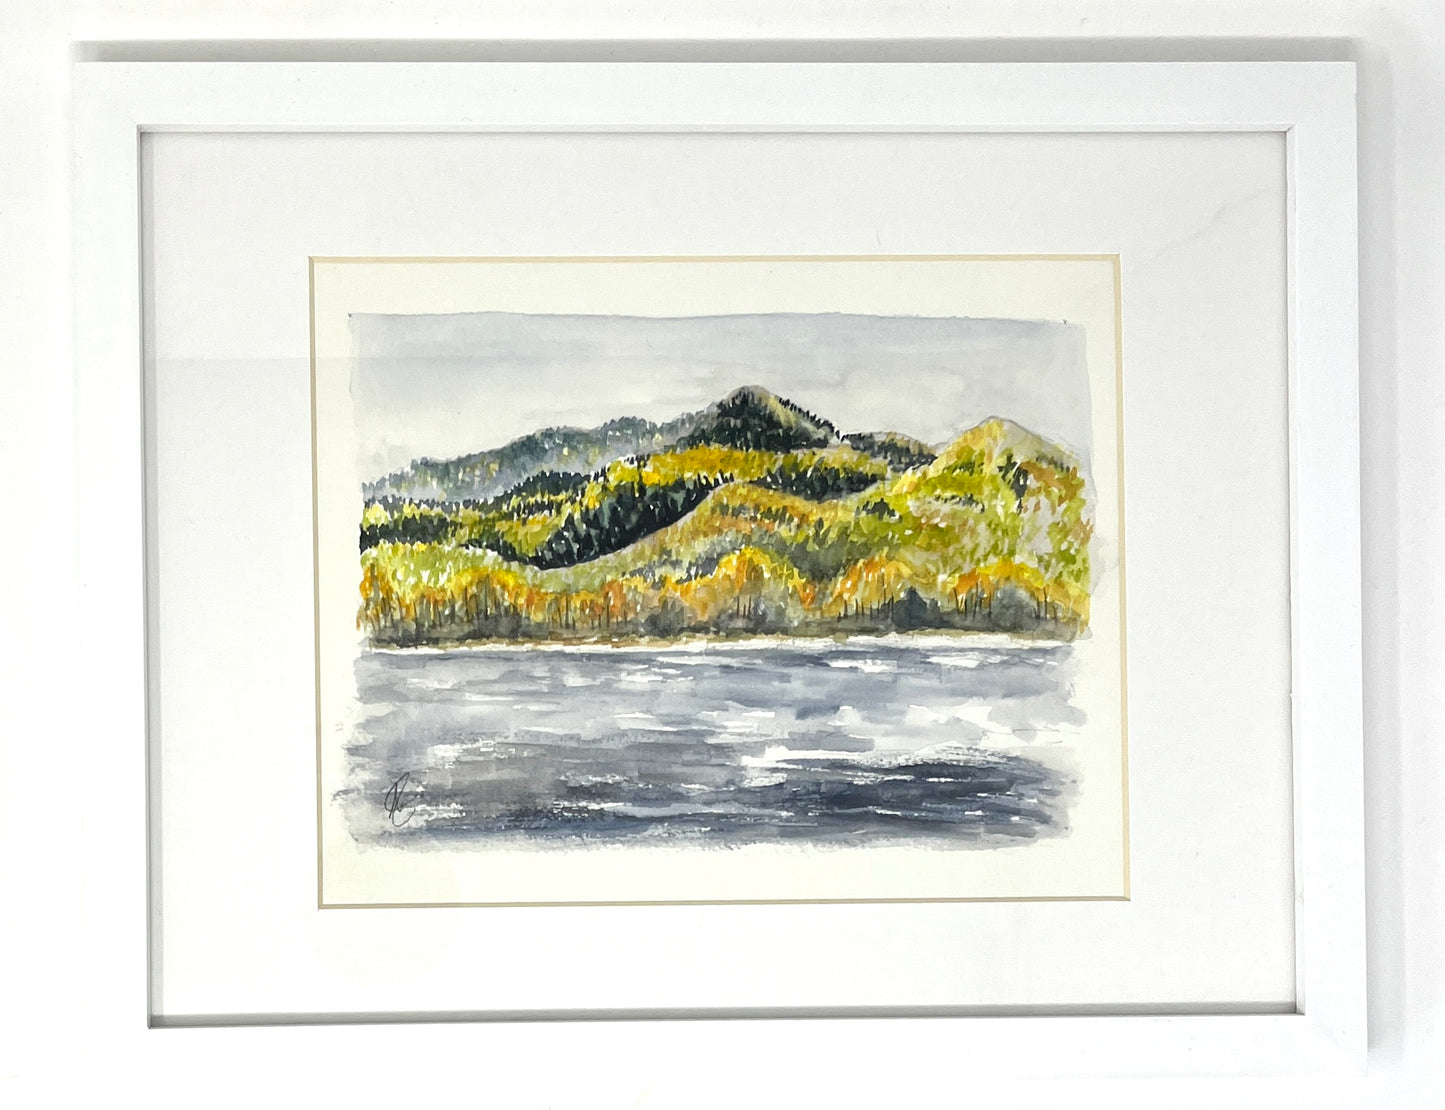 Natalie Connell: Watercolor 8 x 10 inches (framed / unframed)